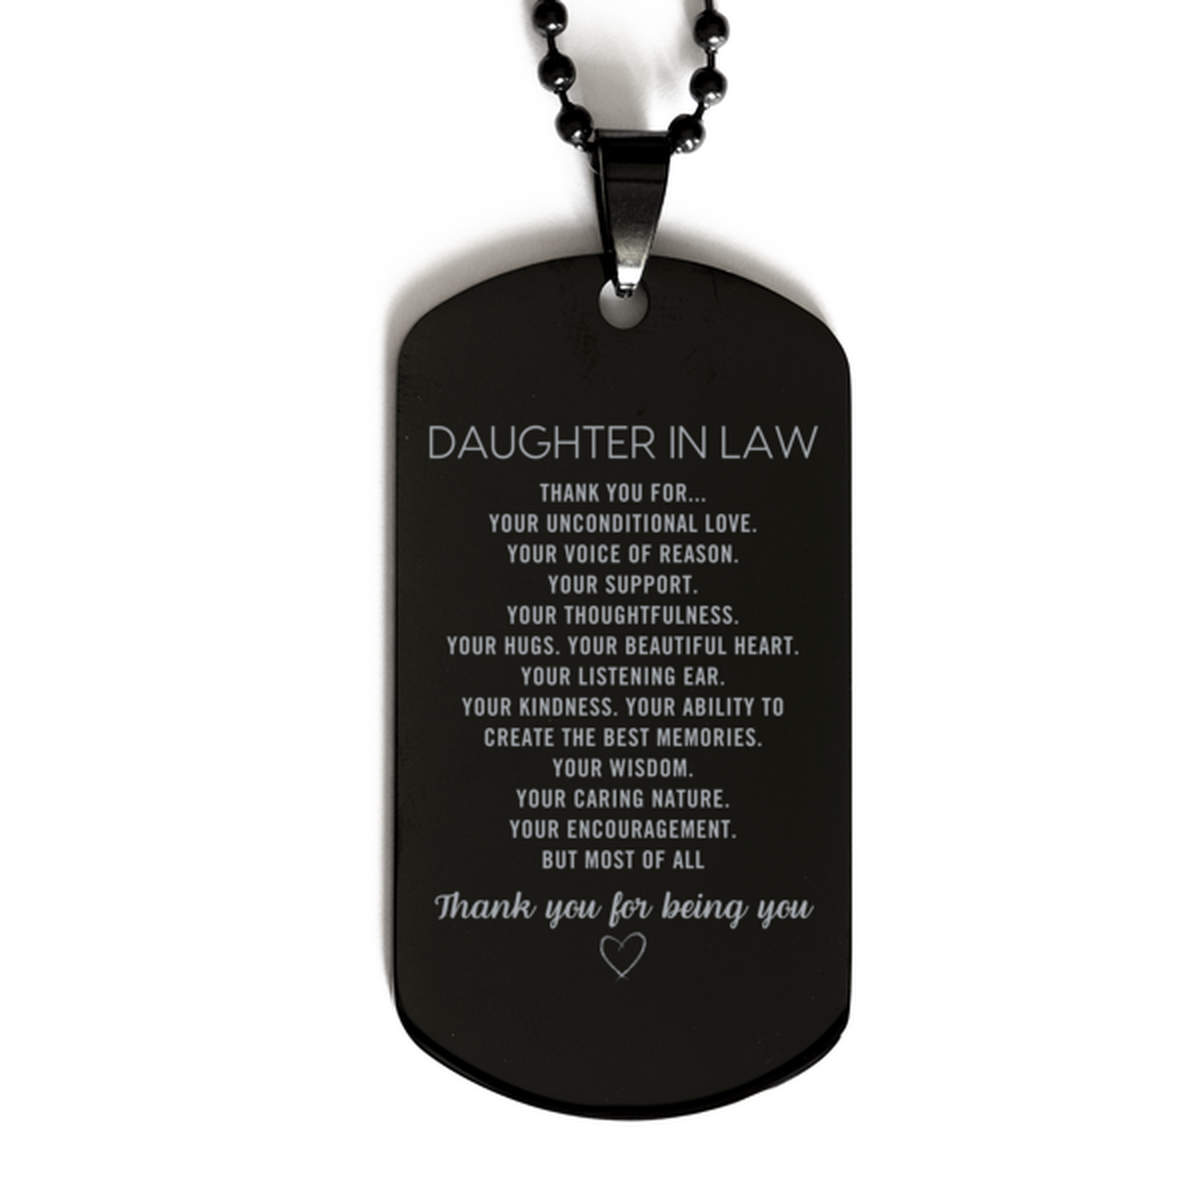 Daughter In Law Black Dog Tag Custom, Engraved Gifts For Daughter In Law Christmas Graduation Birthday Gifts for Men Women Daughter In Law Thank you for Your unconditional love